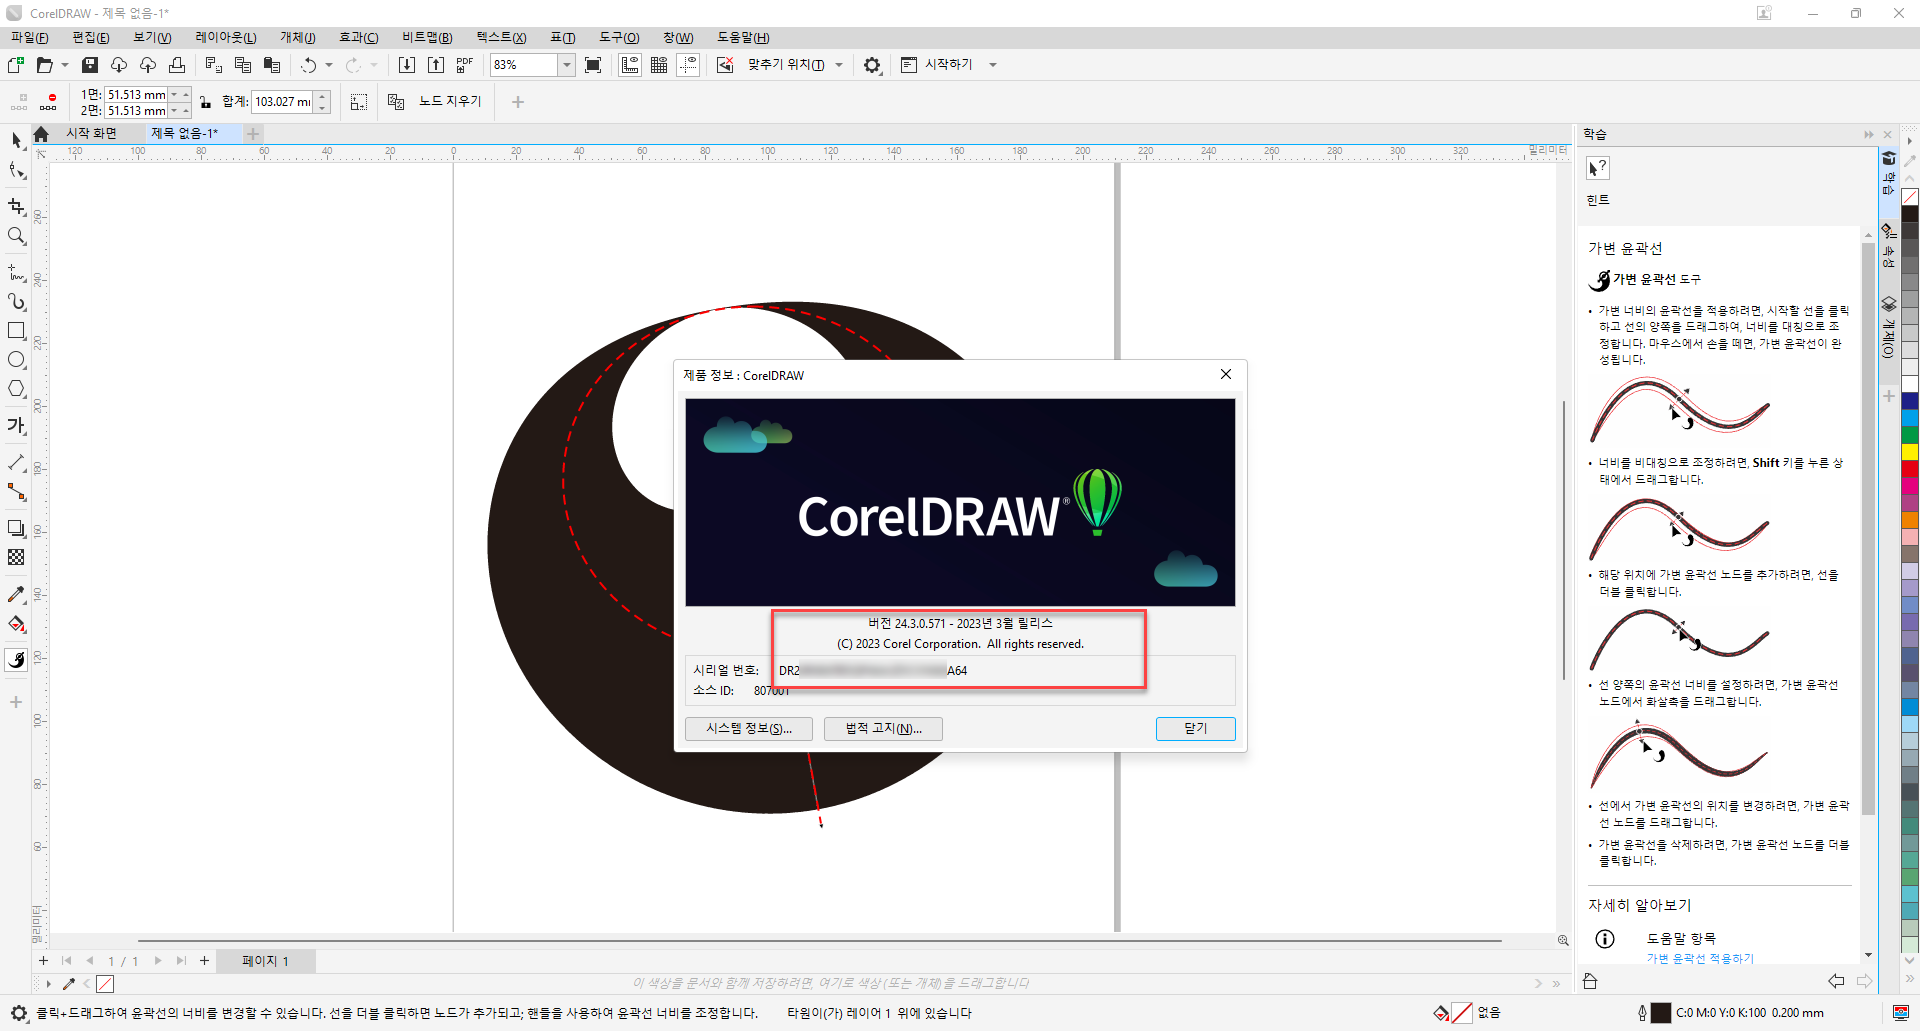 About_CorelDRAW.png